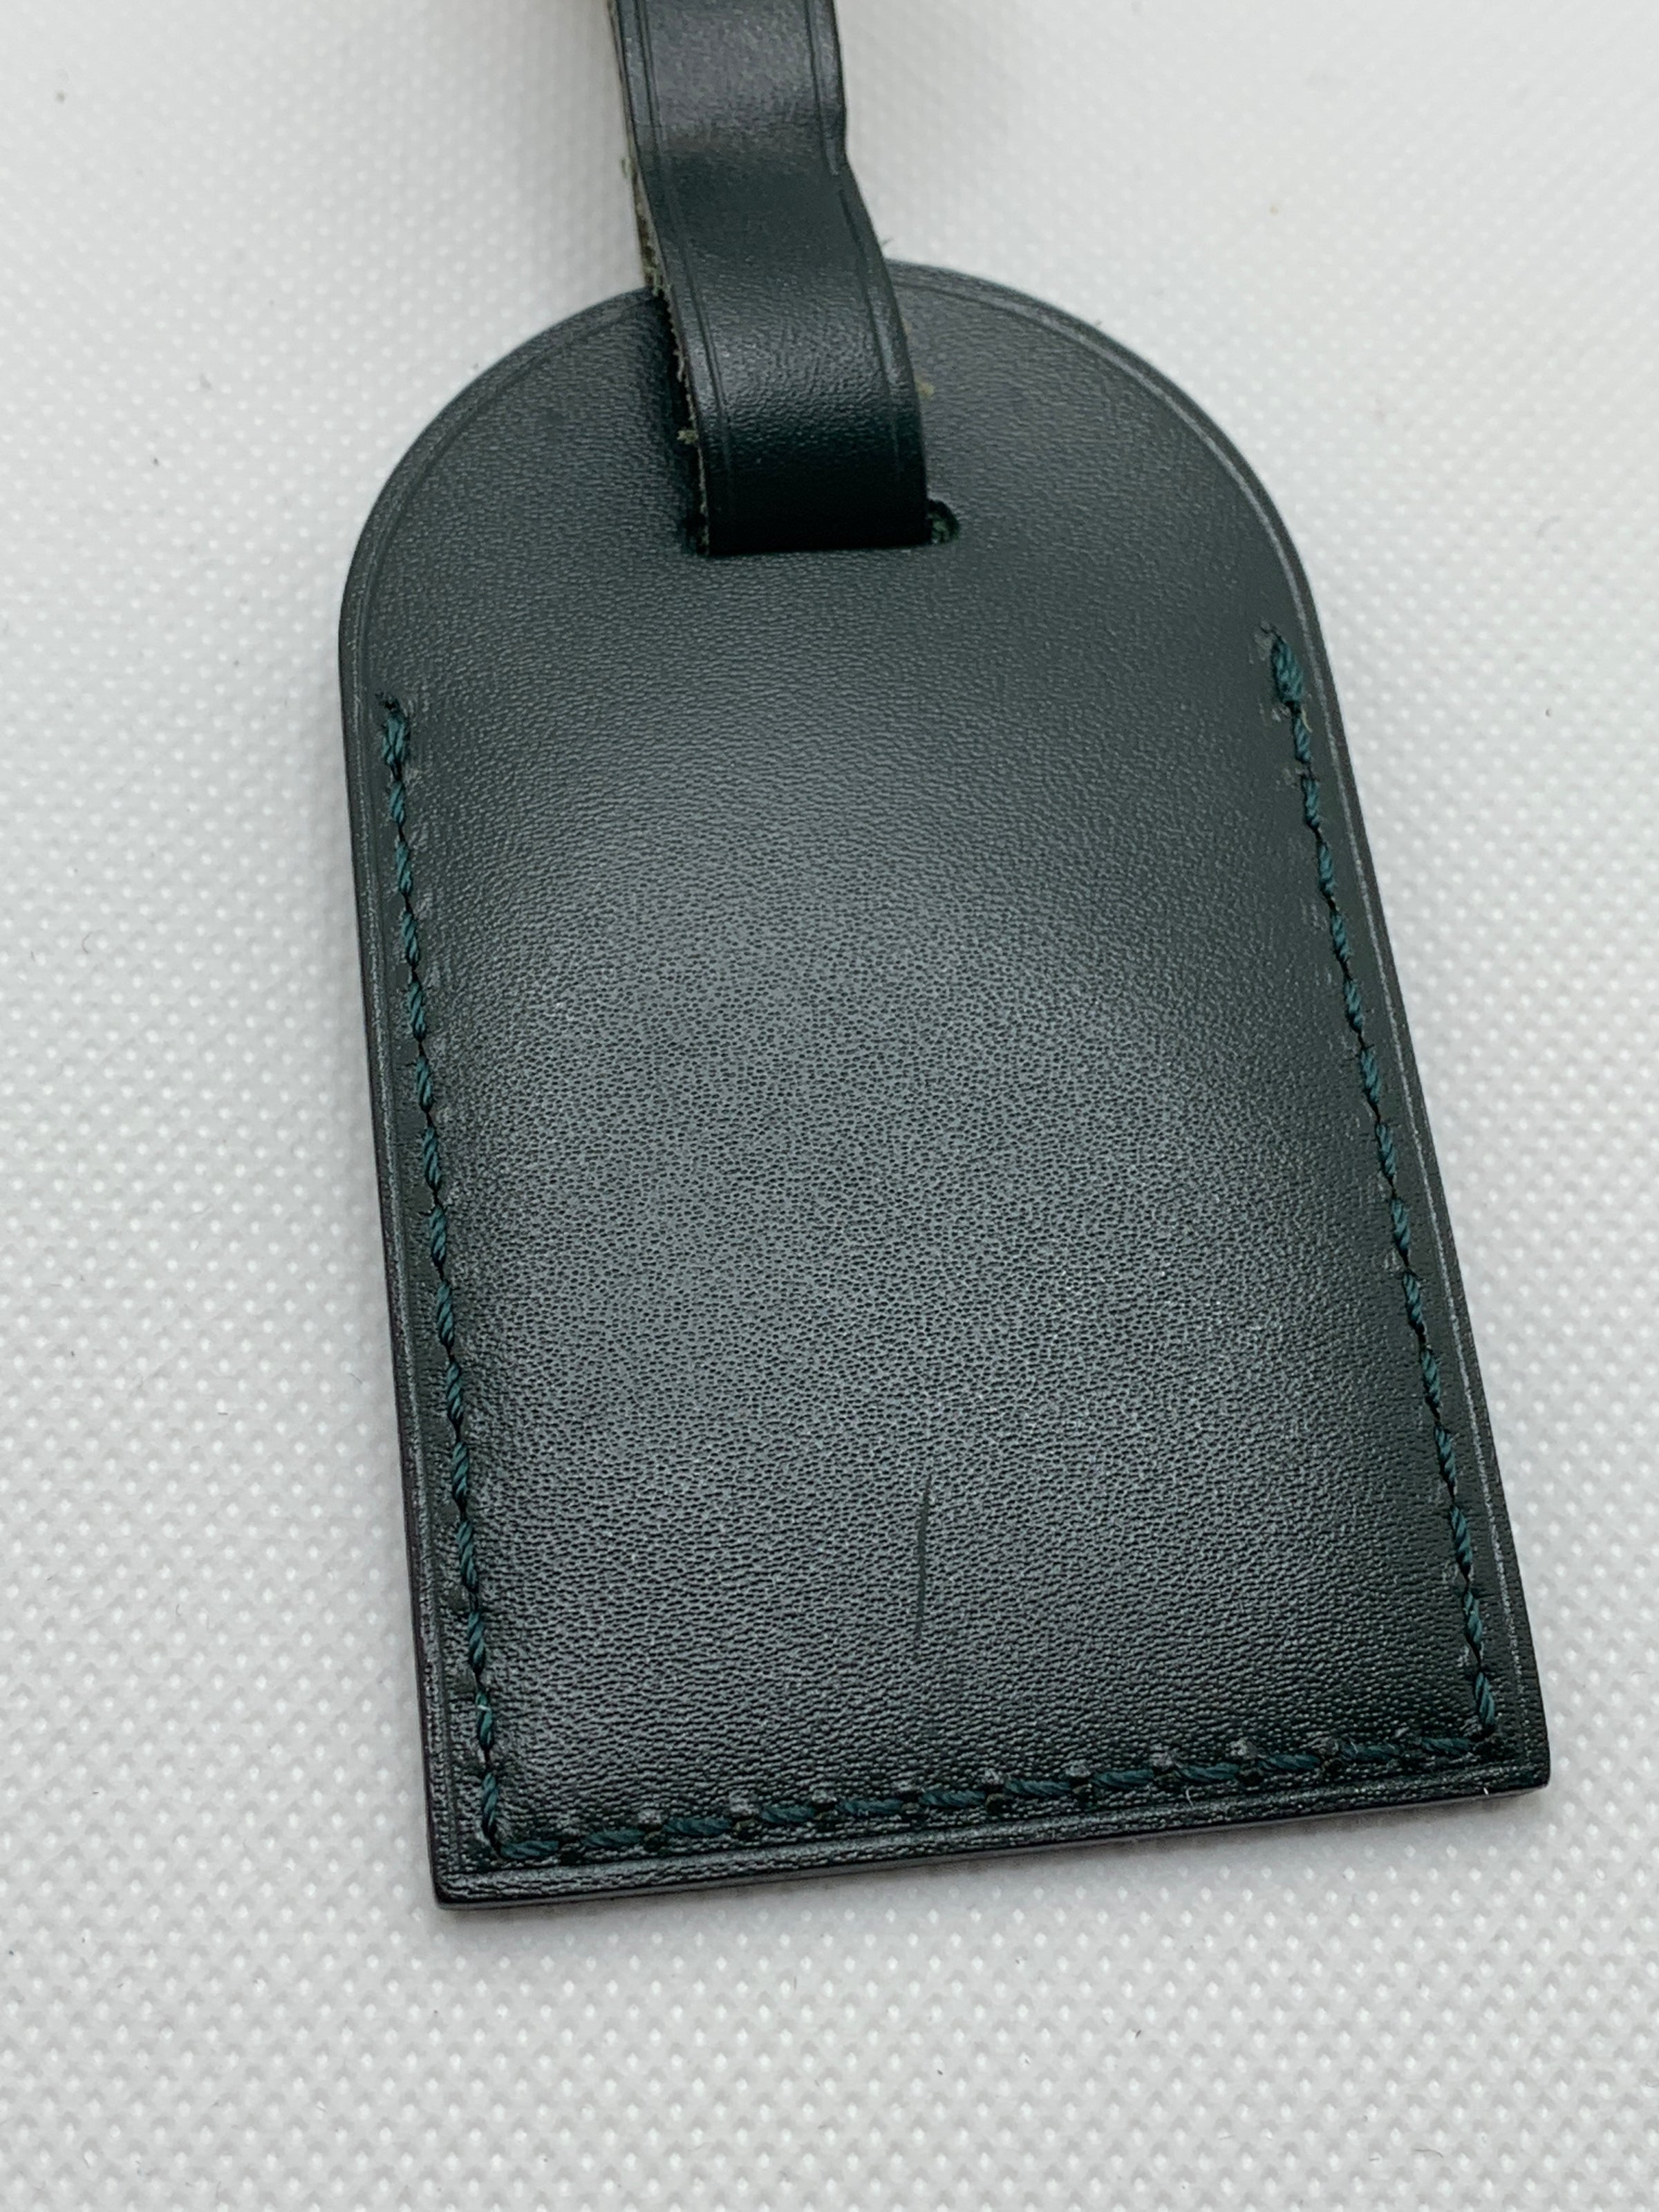 Authentic Louis Vuitton Large Dark Green Leather Luggage Tag Stamped K.K